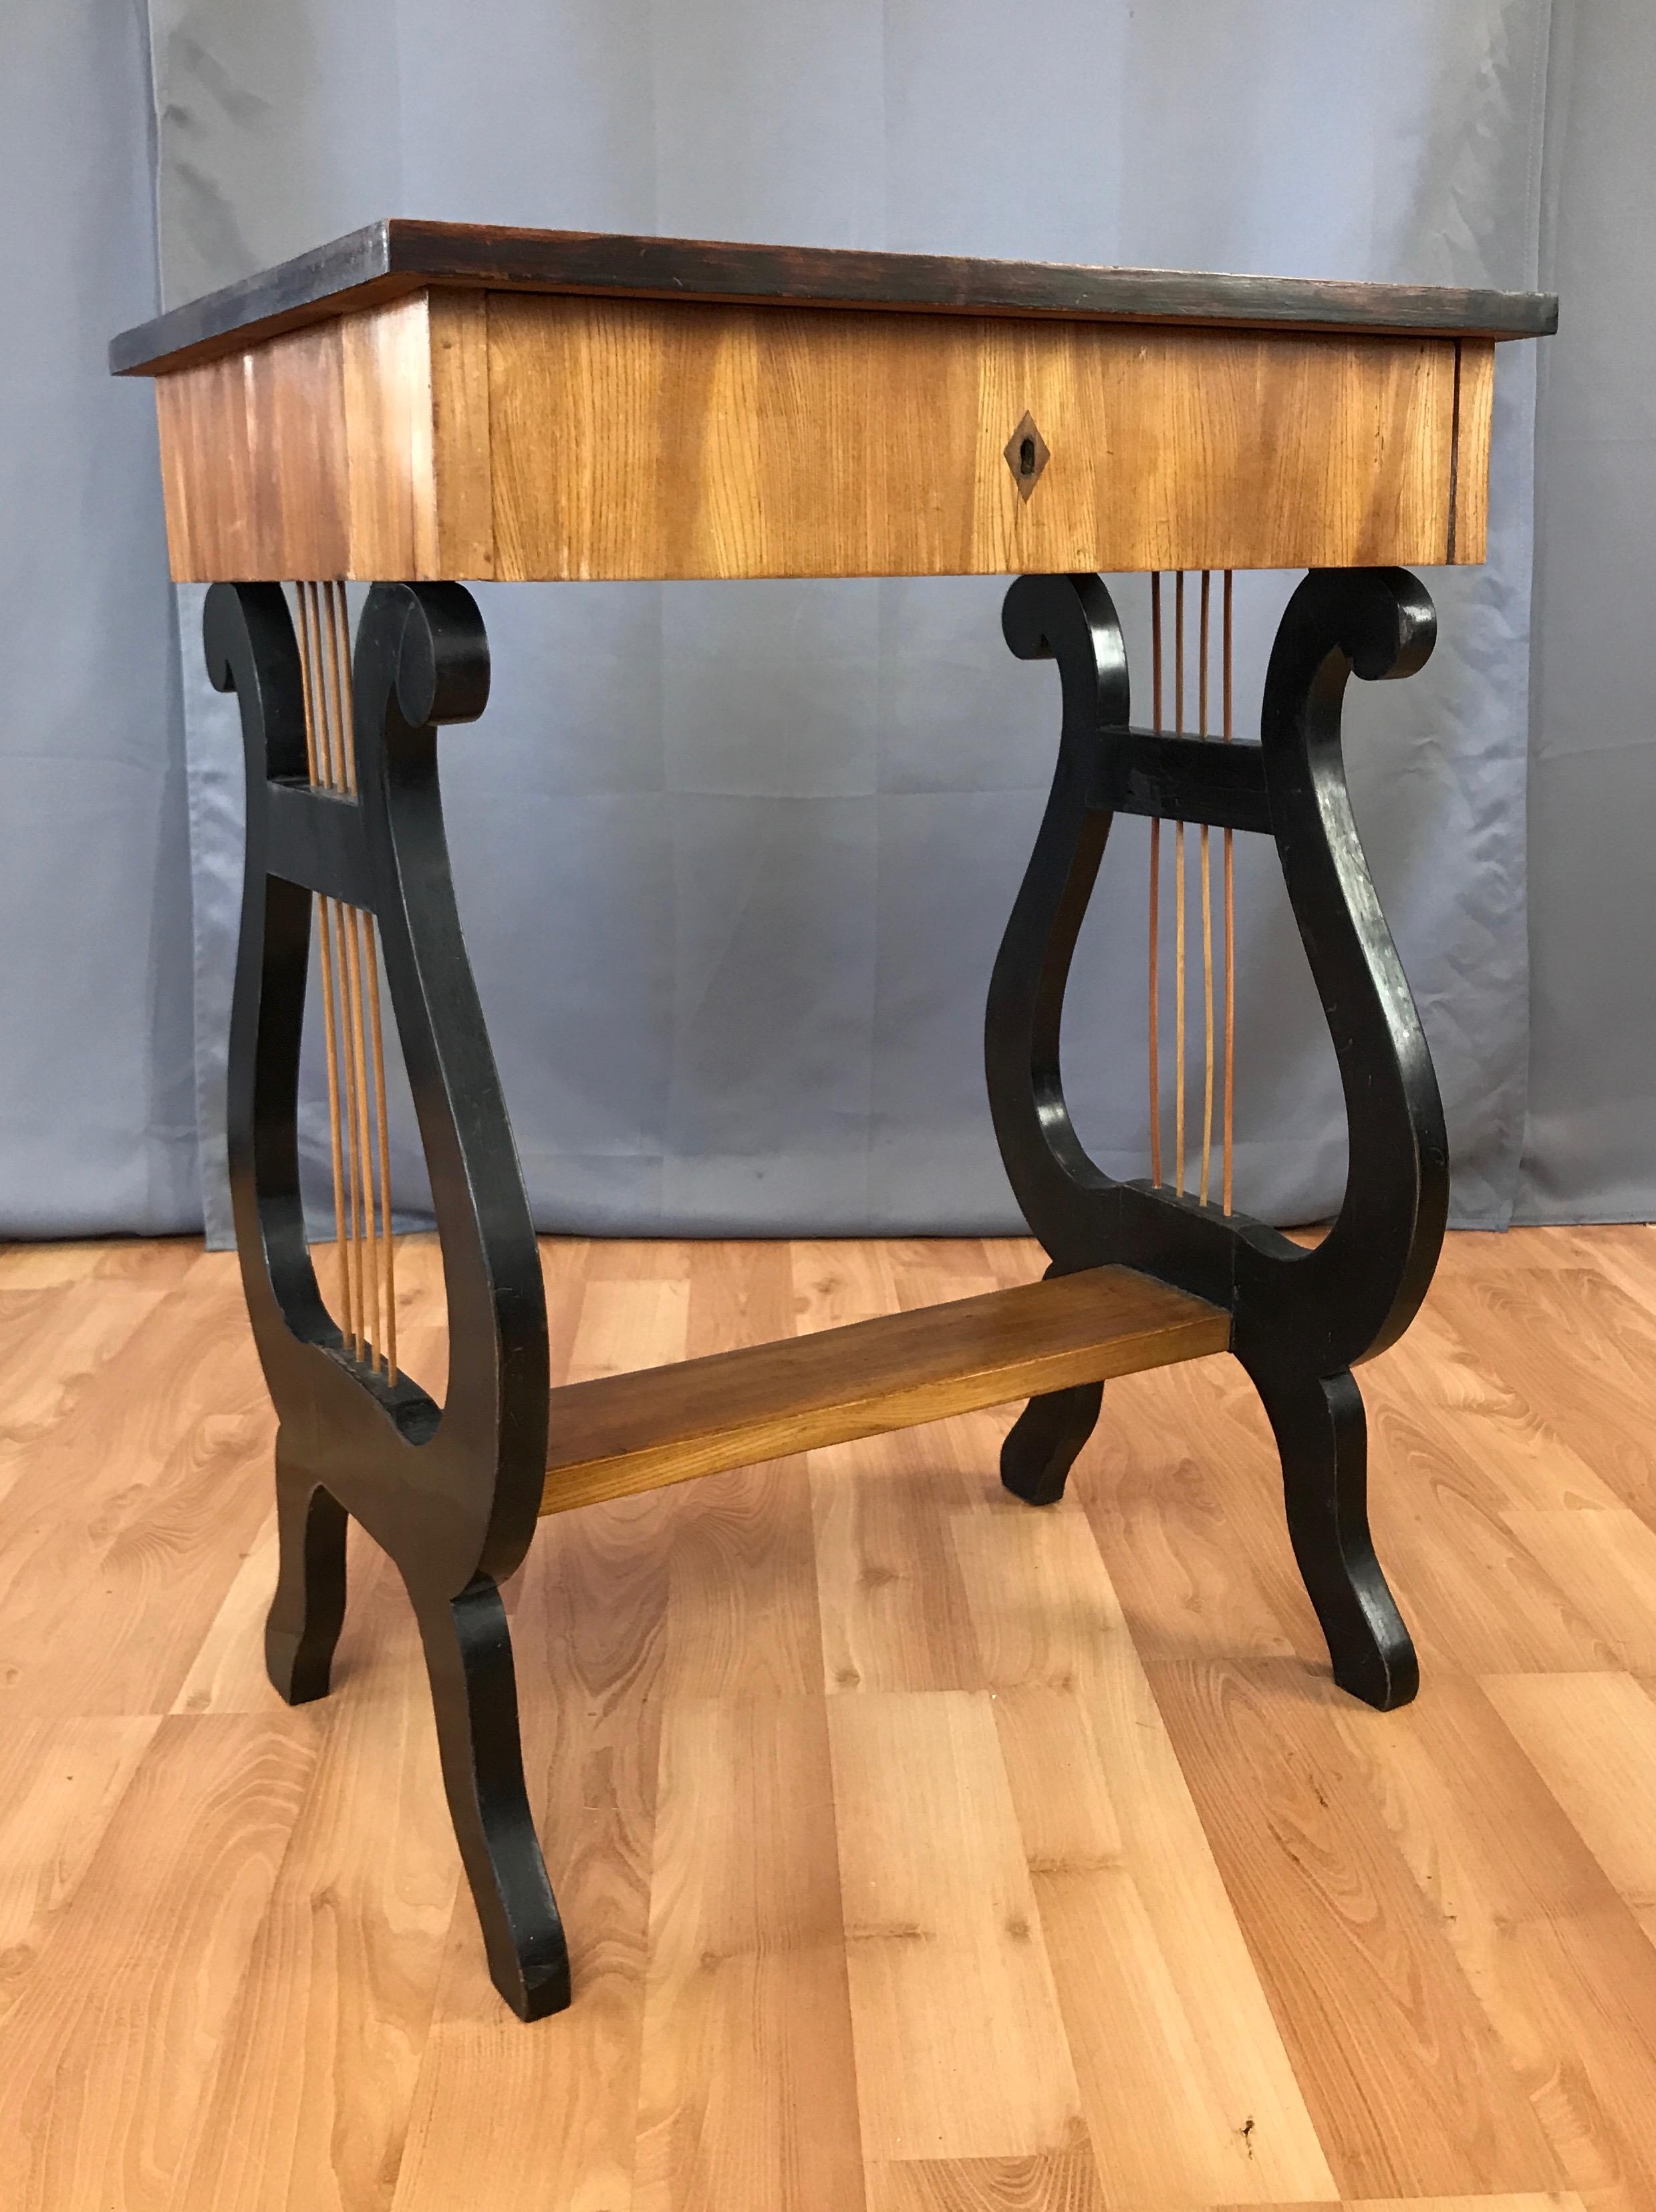 An early Karl Johan-period Swedish Biedermeier lyre motif small birch table with drawer.

Bookmatched birch veneer top with ebonized edge, and birch veneer sides and drawer with diamond keyhole. (Key no longer extant.) Originally designed as a